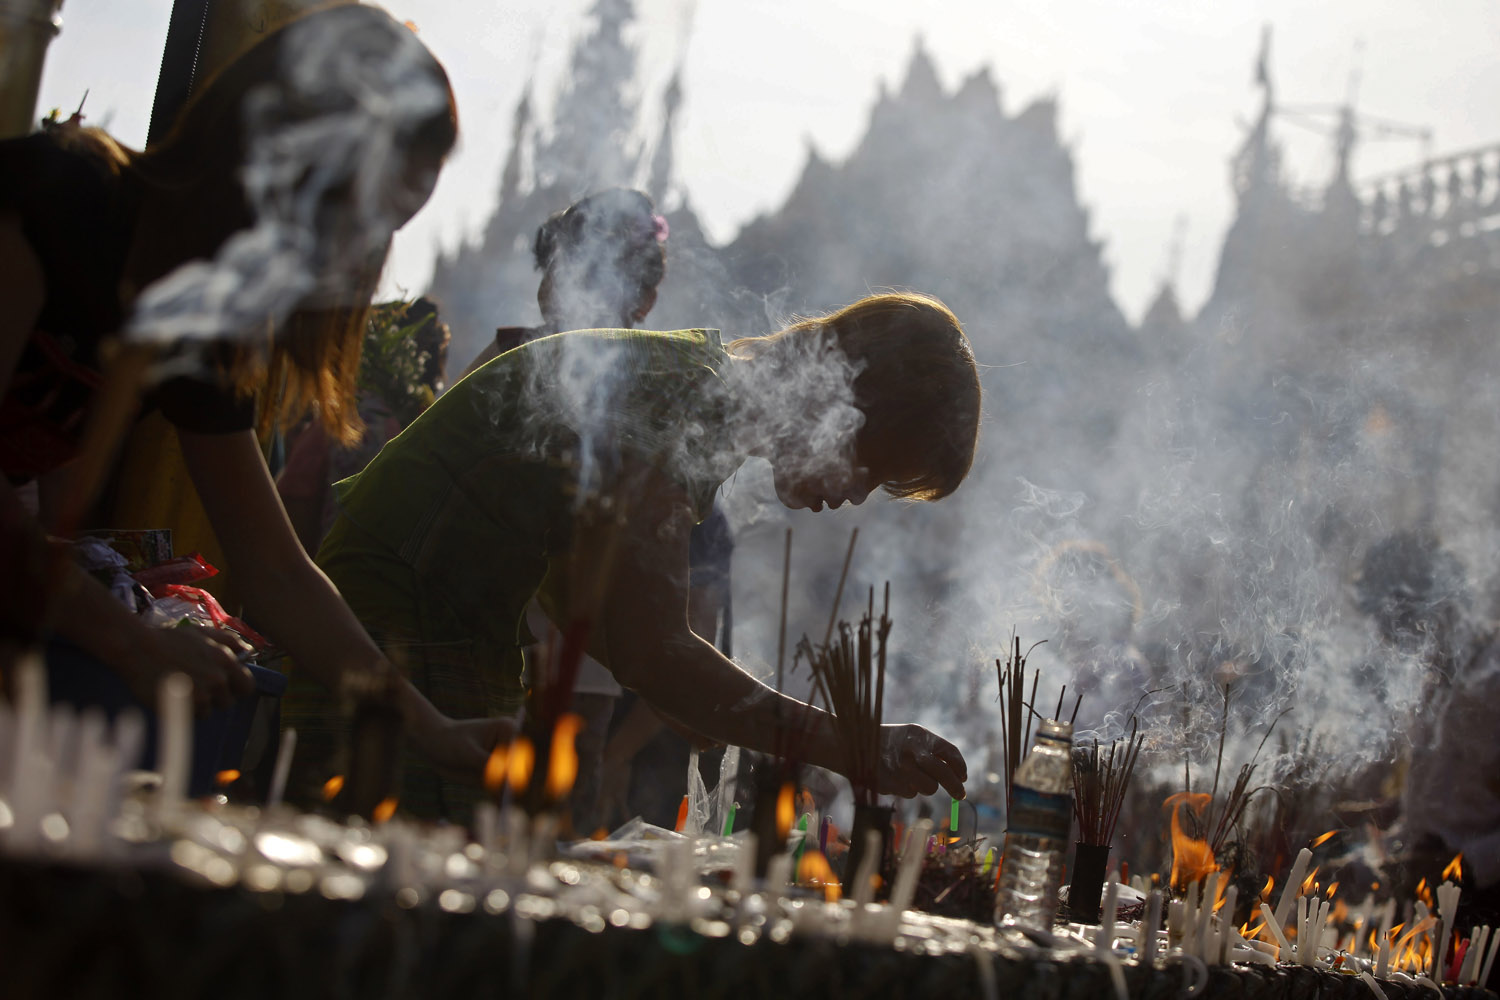 Image: Oct. 30, 2012. People light candles at a pagoda during the Full Moon Festival in Yangon, Myanmar.